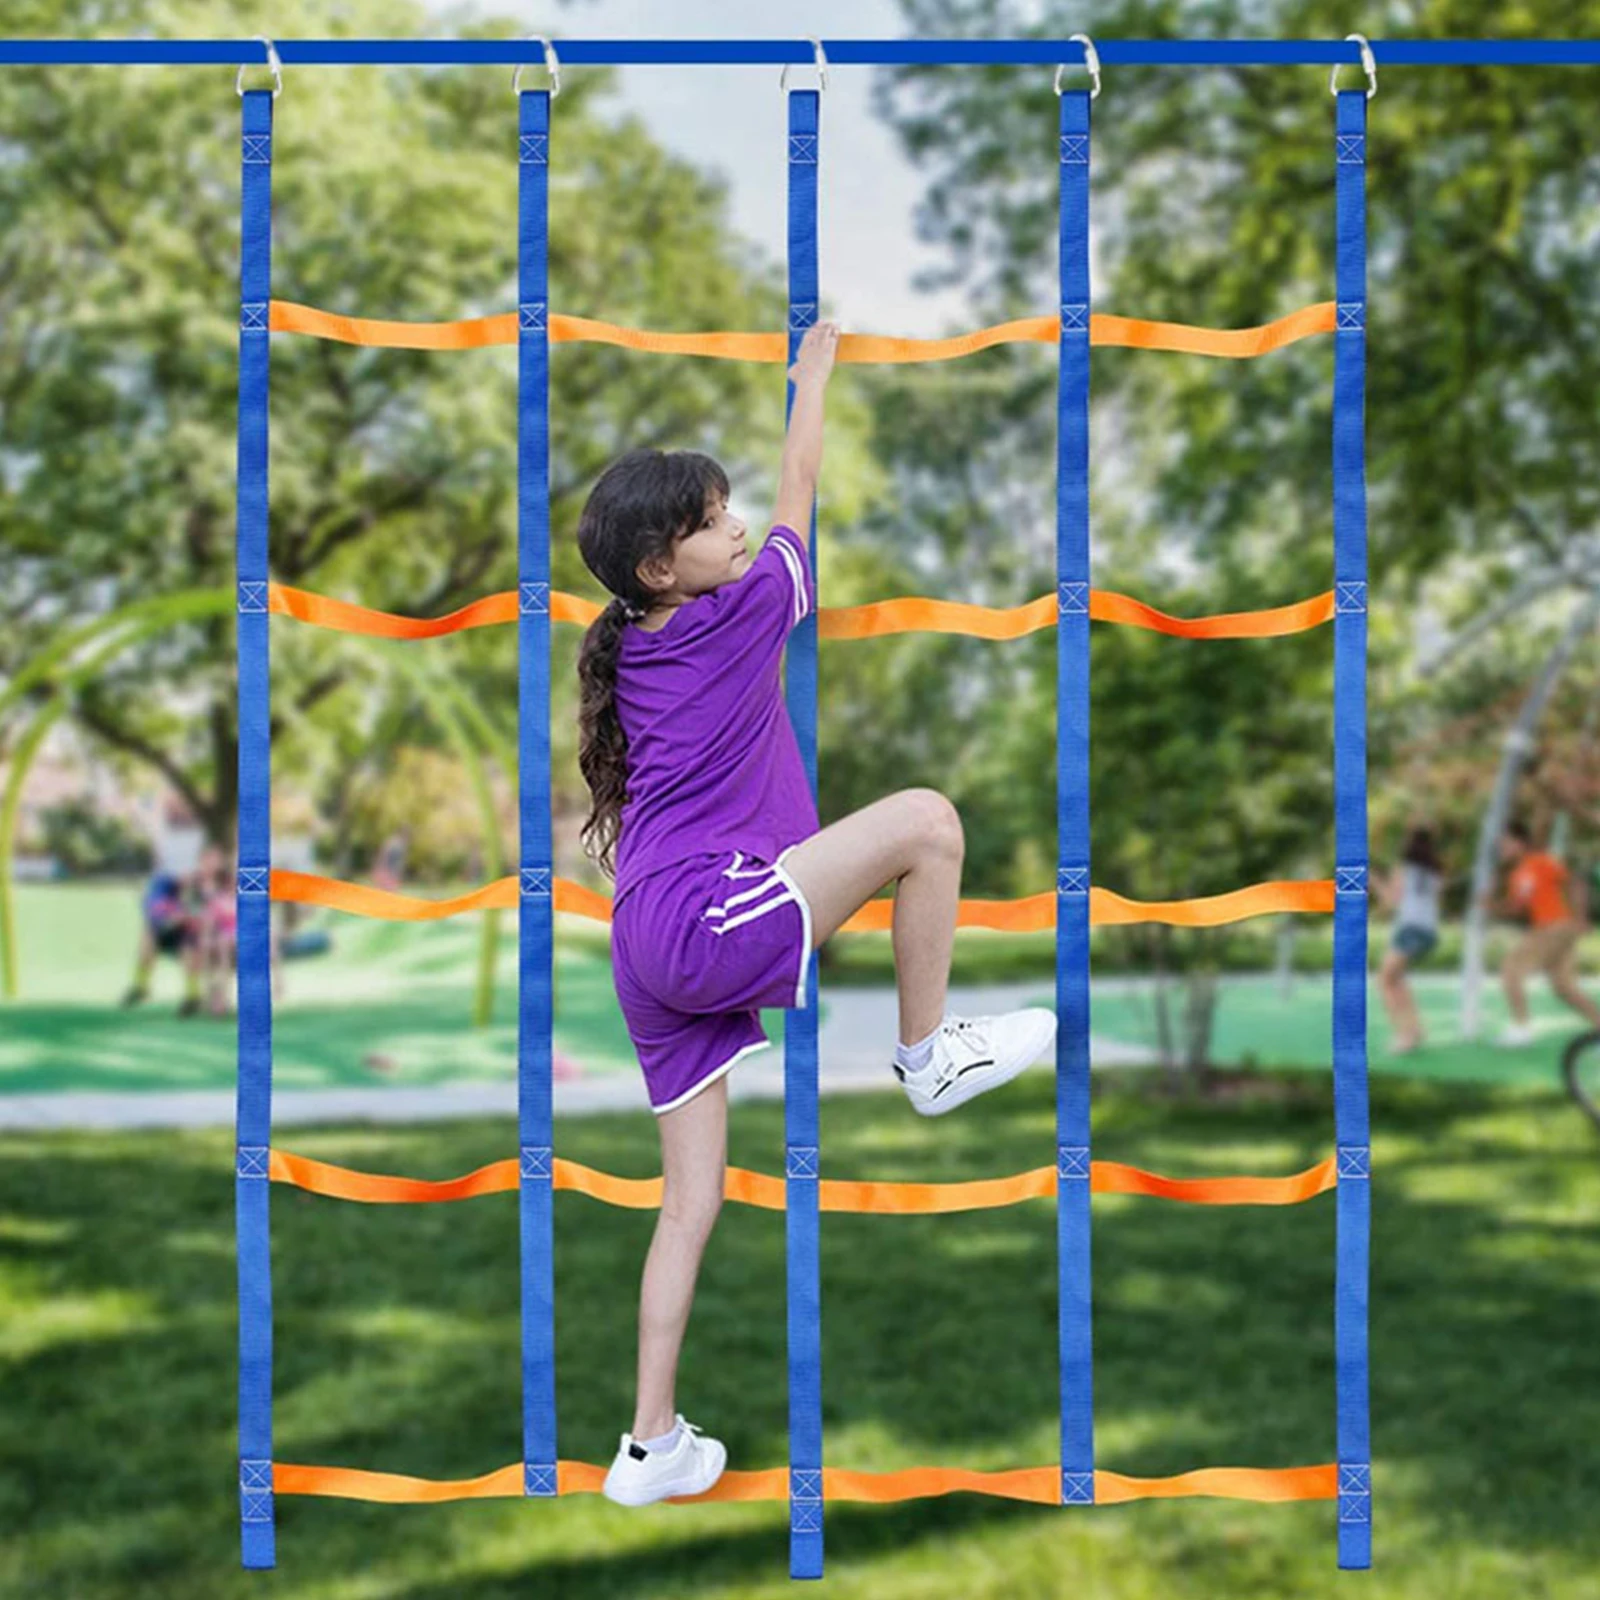 

1pc Climbing Net Polyester Climbing Cargo Net Rope Ladder for Kids Outdoor Treehouse GYM Playground Obstacle Course Training Net